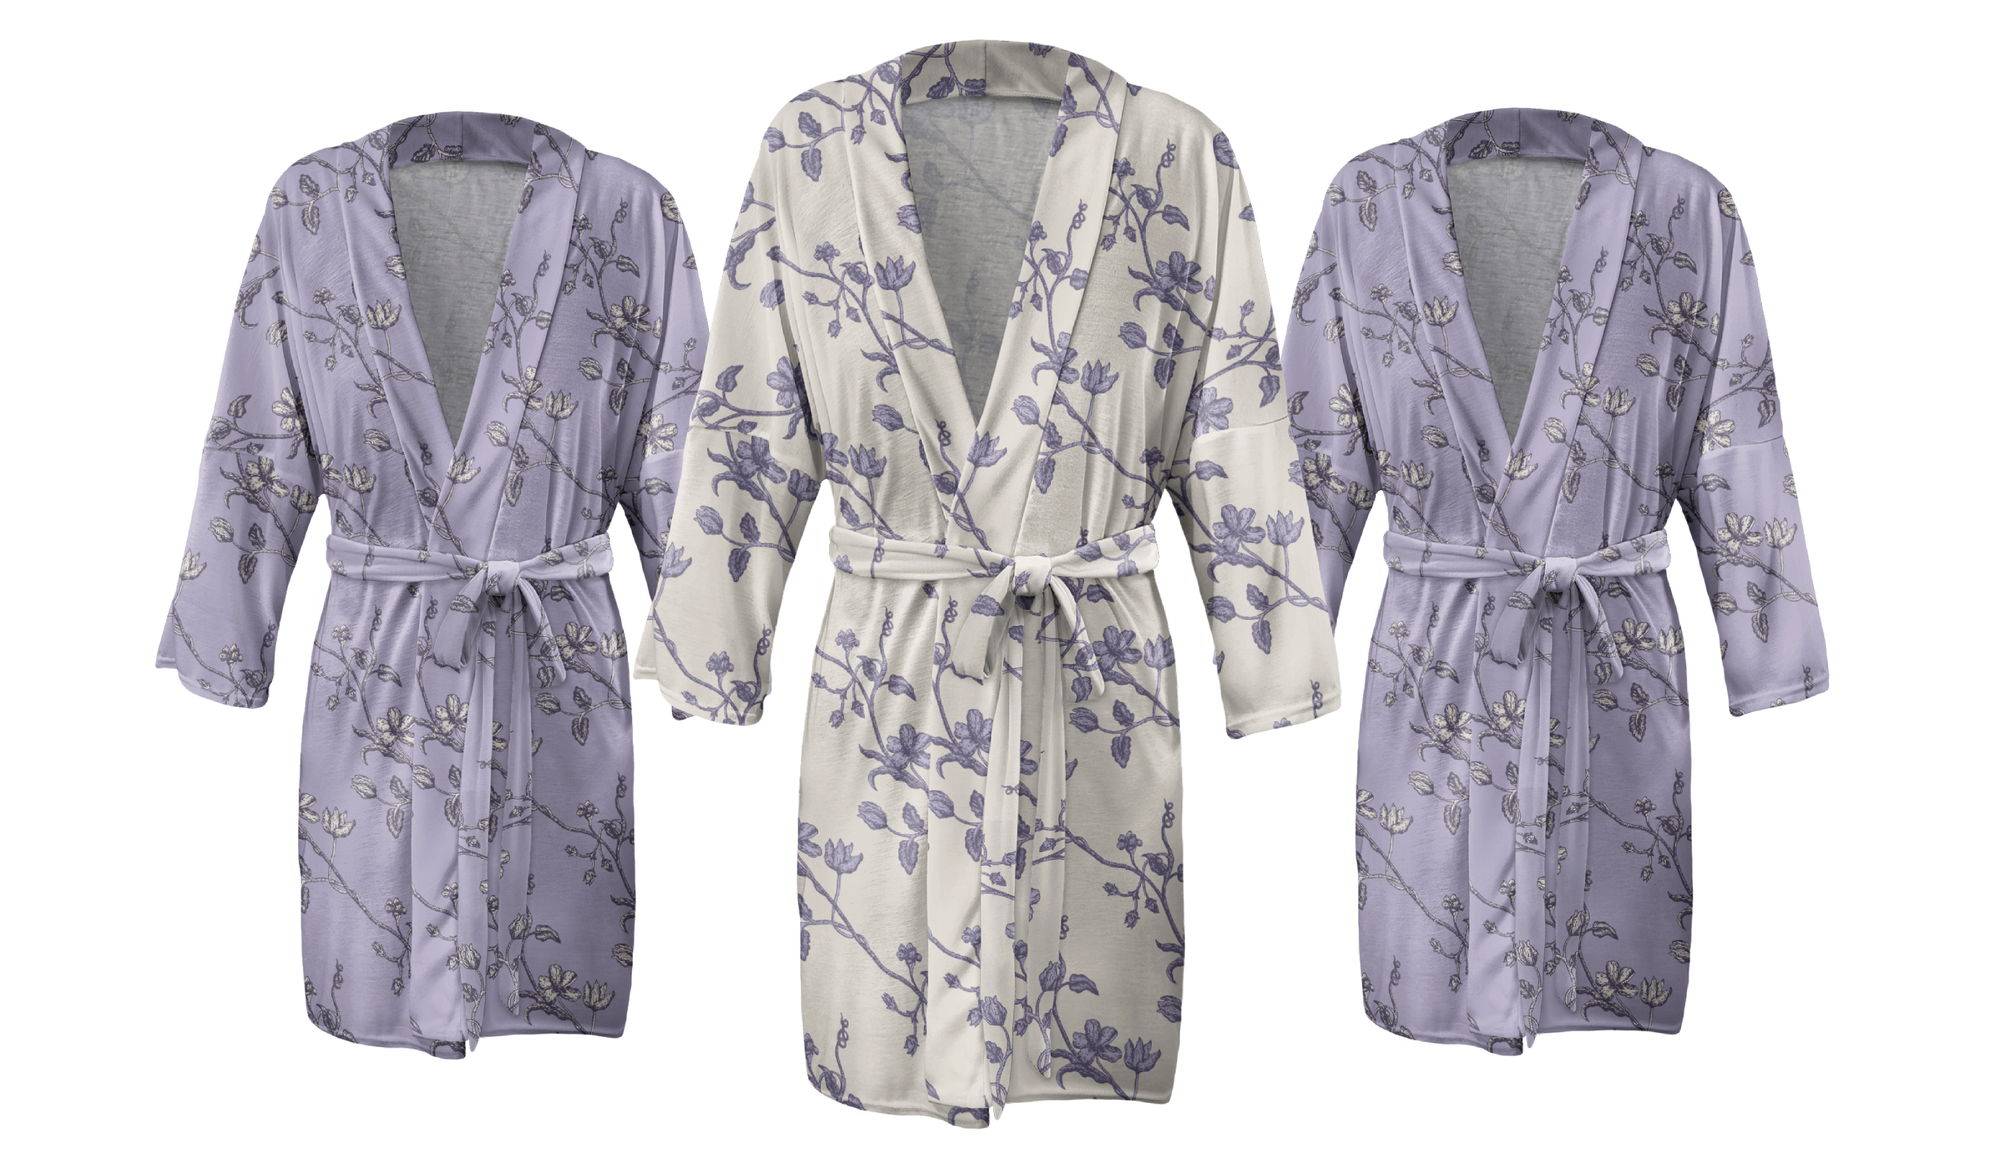 Three bridal robes in complementary customizable patterns and colors